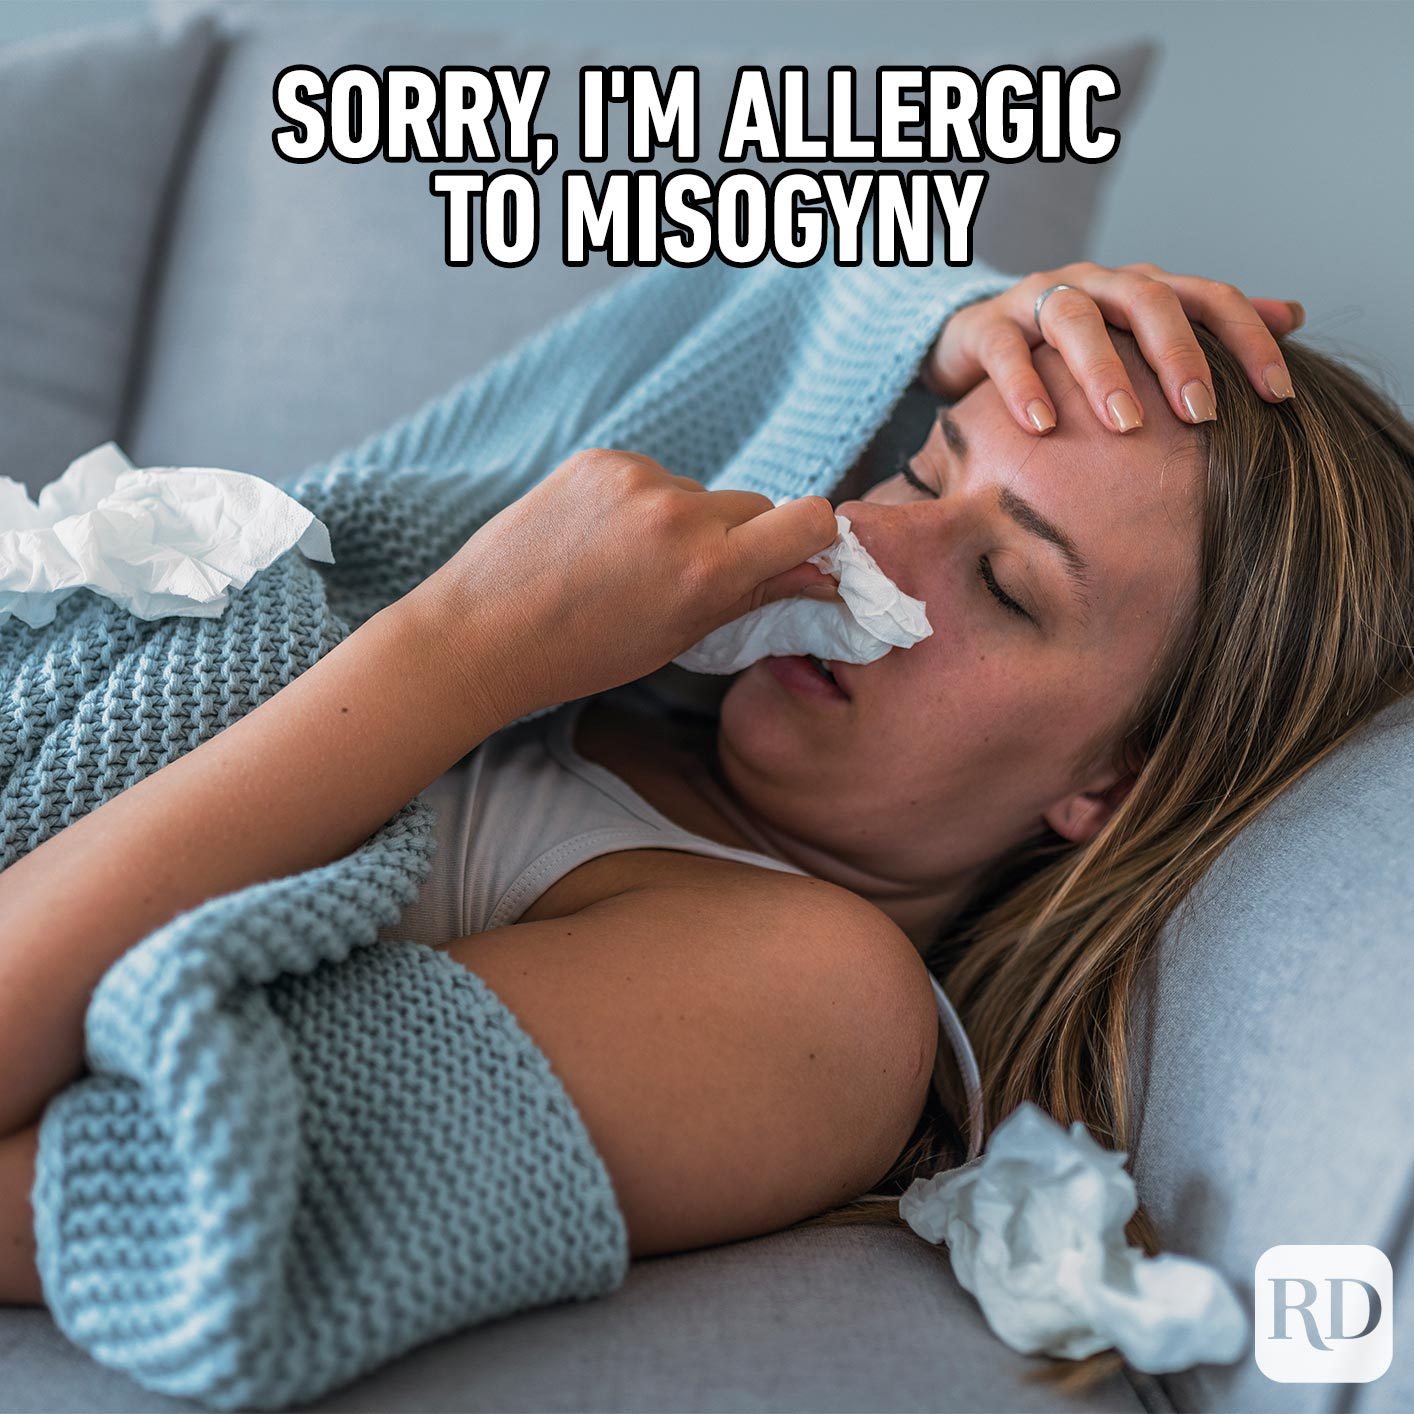 Woman sick on the couch. Meme text: Sorry, I'm allergic to misogyny